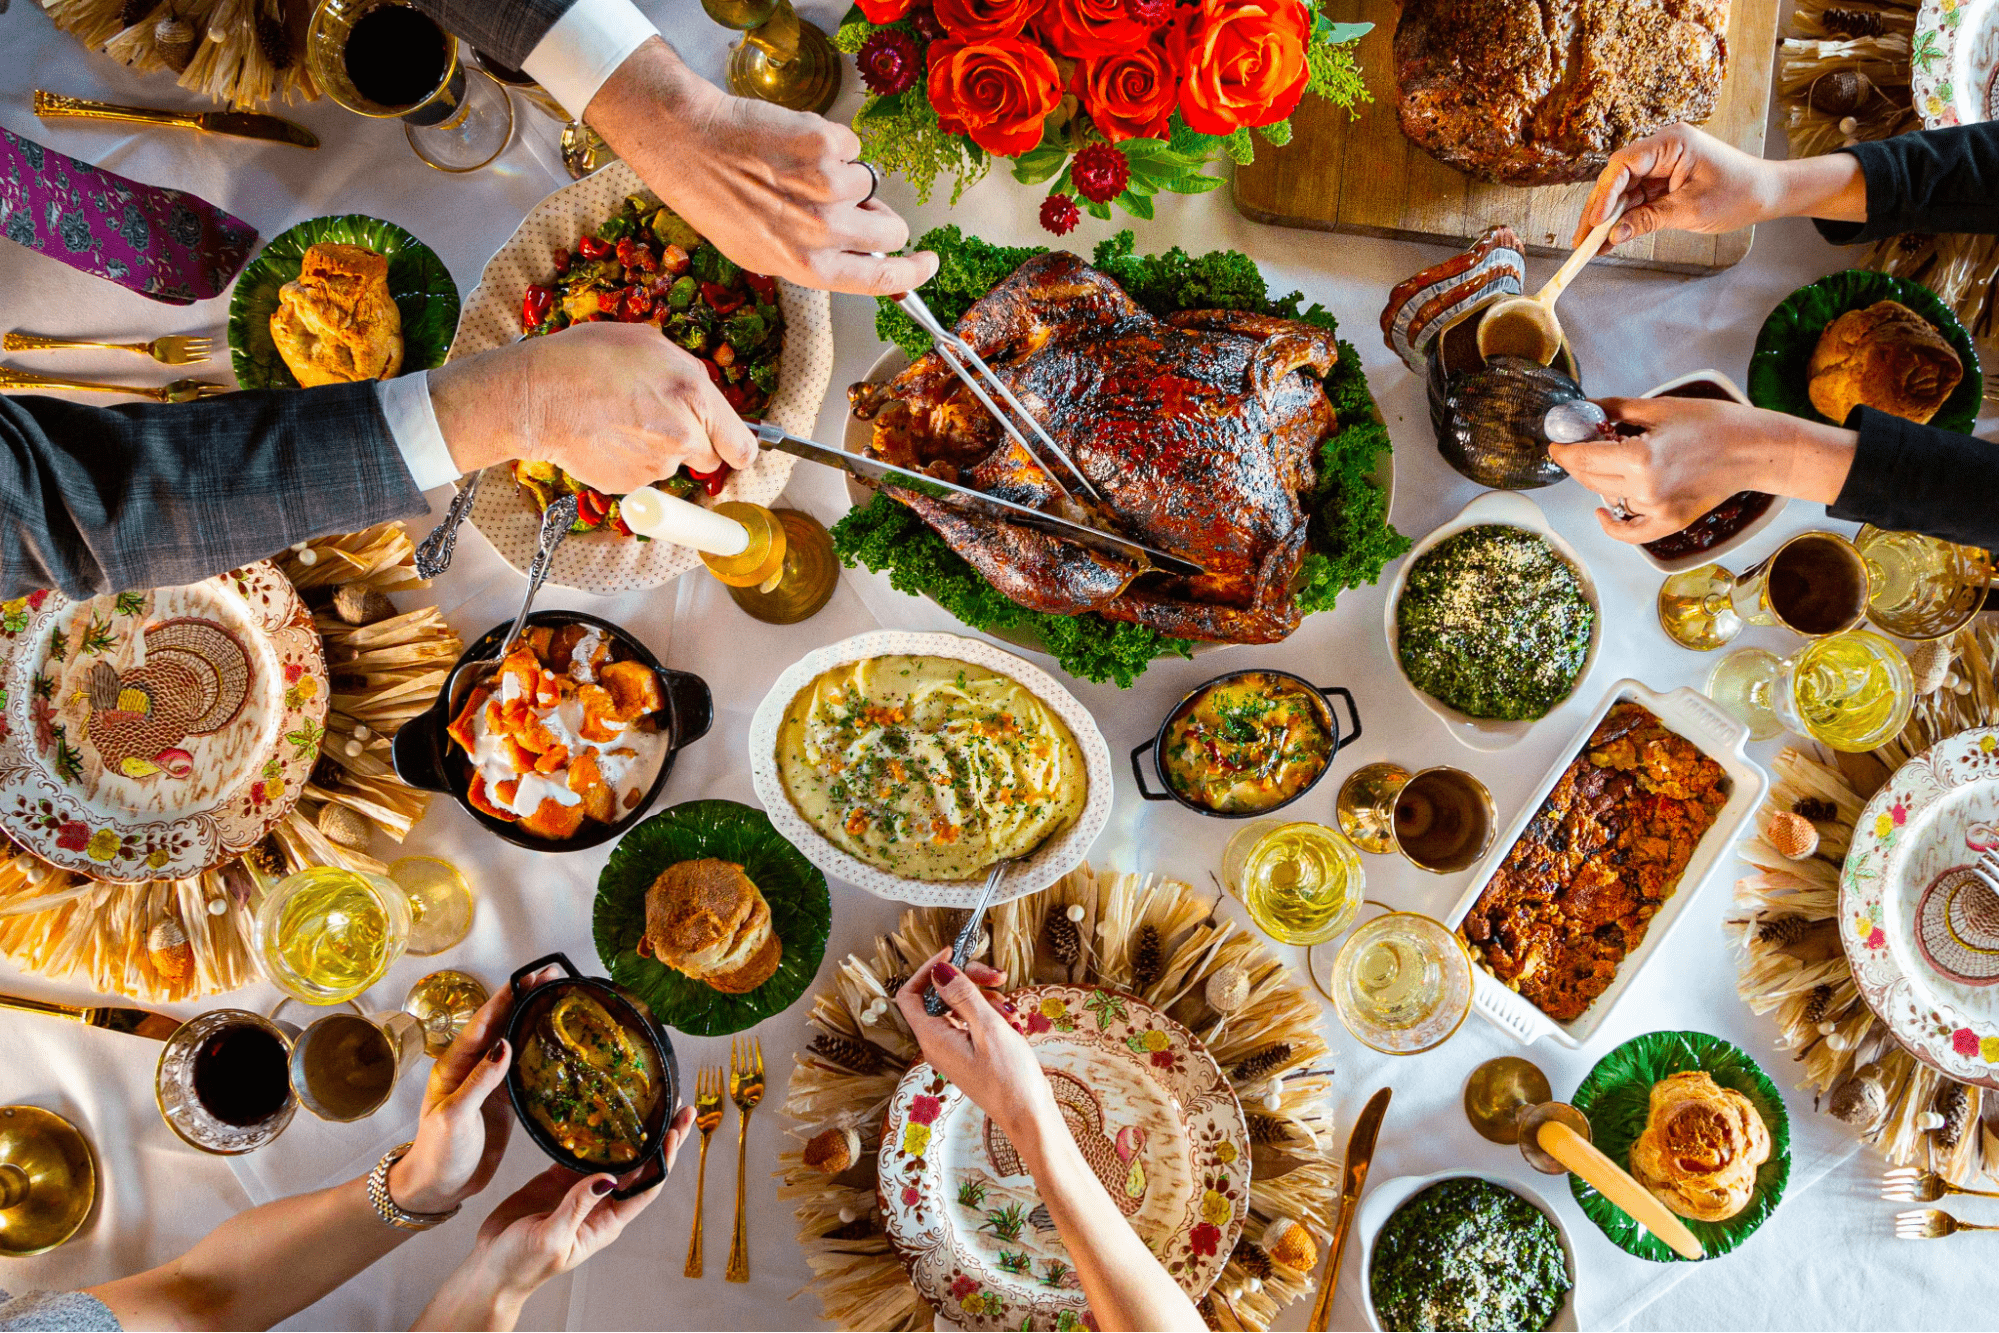 Where to Dine In Houston on Thanksgiving Day 2023 - Houston Food Finder